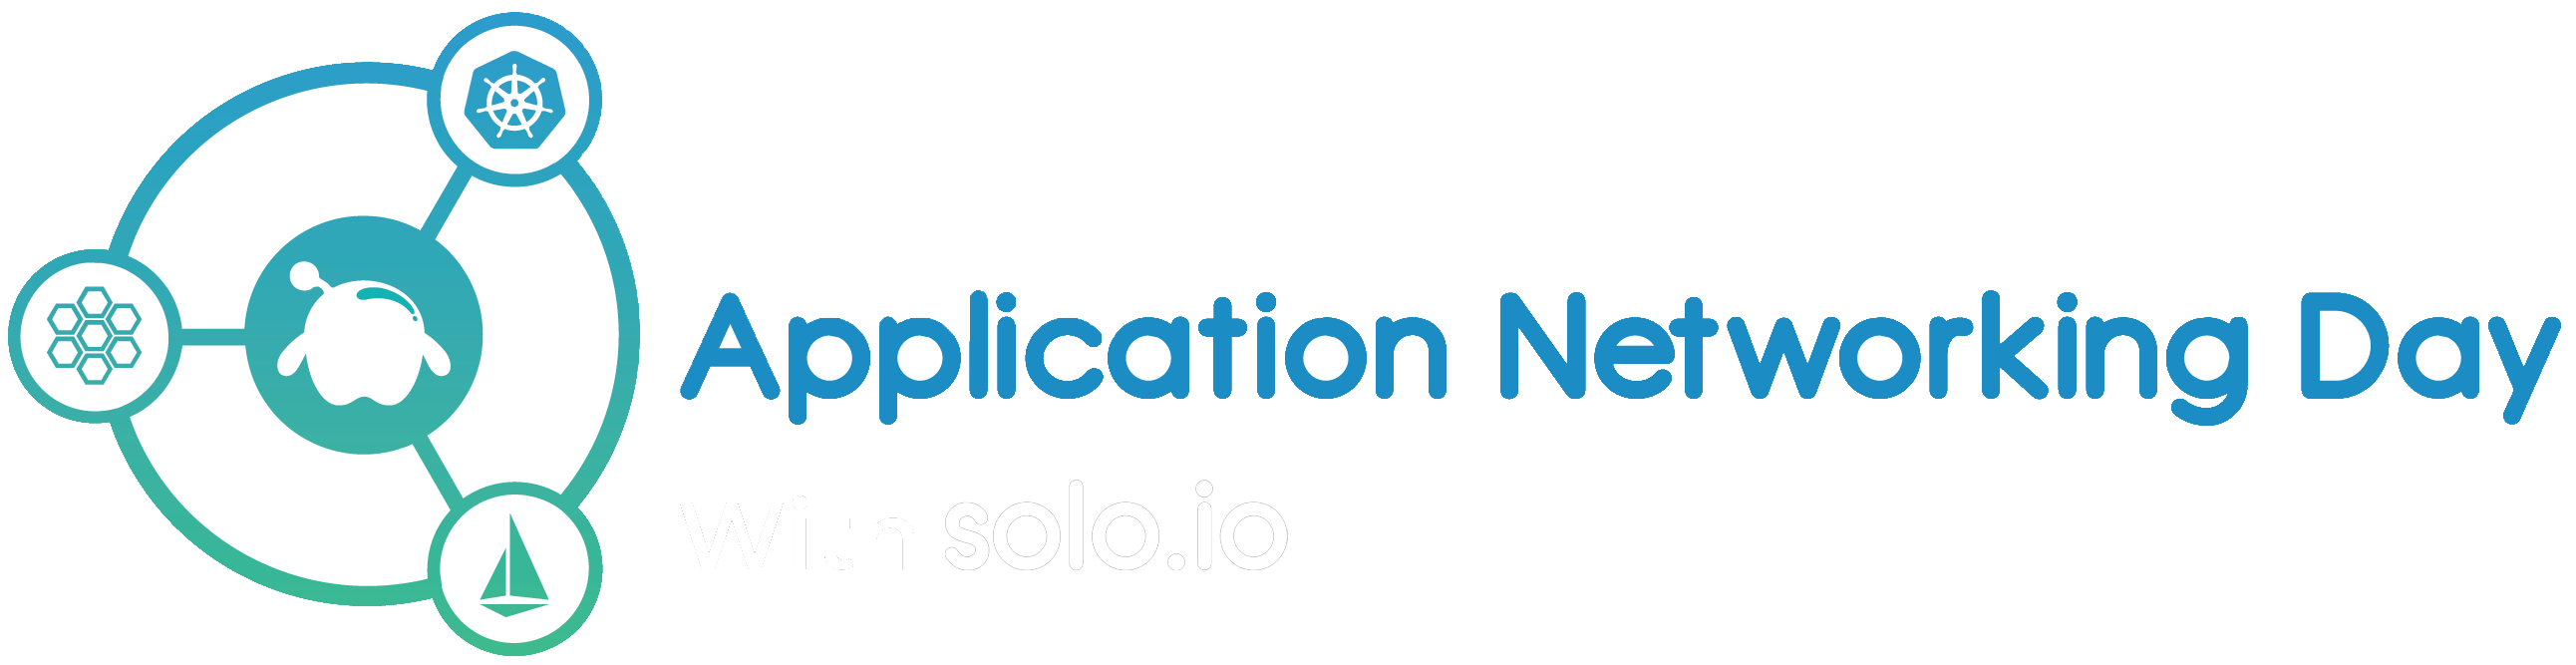 Solo_Application_Networking_Day_Logo_CMYK_V4_OUTLINES_White-A.png